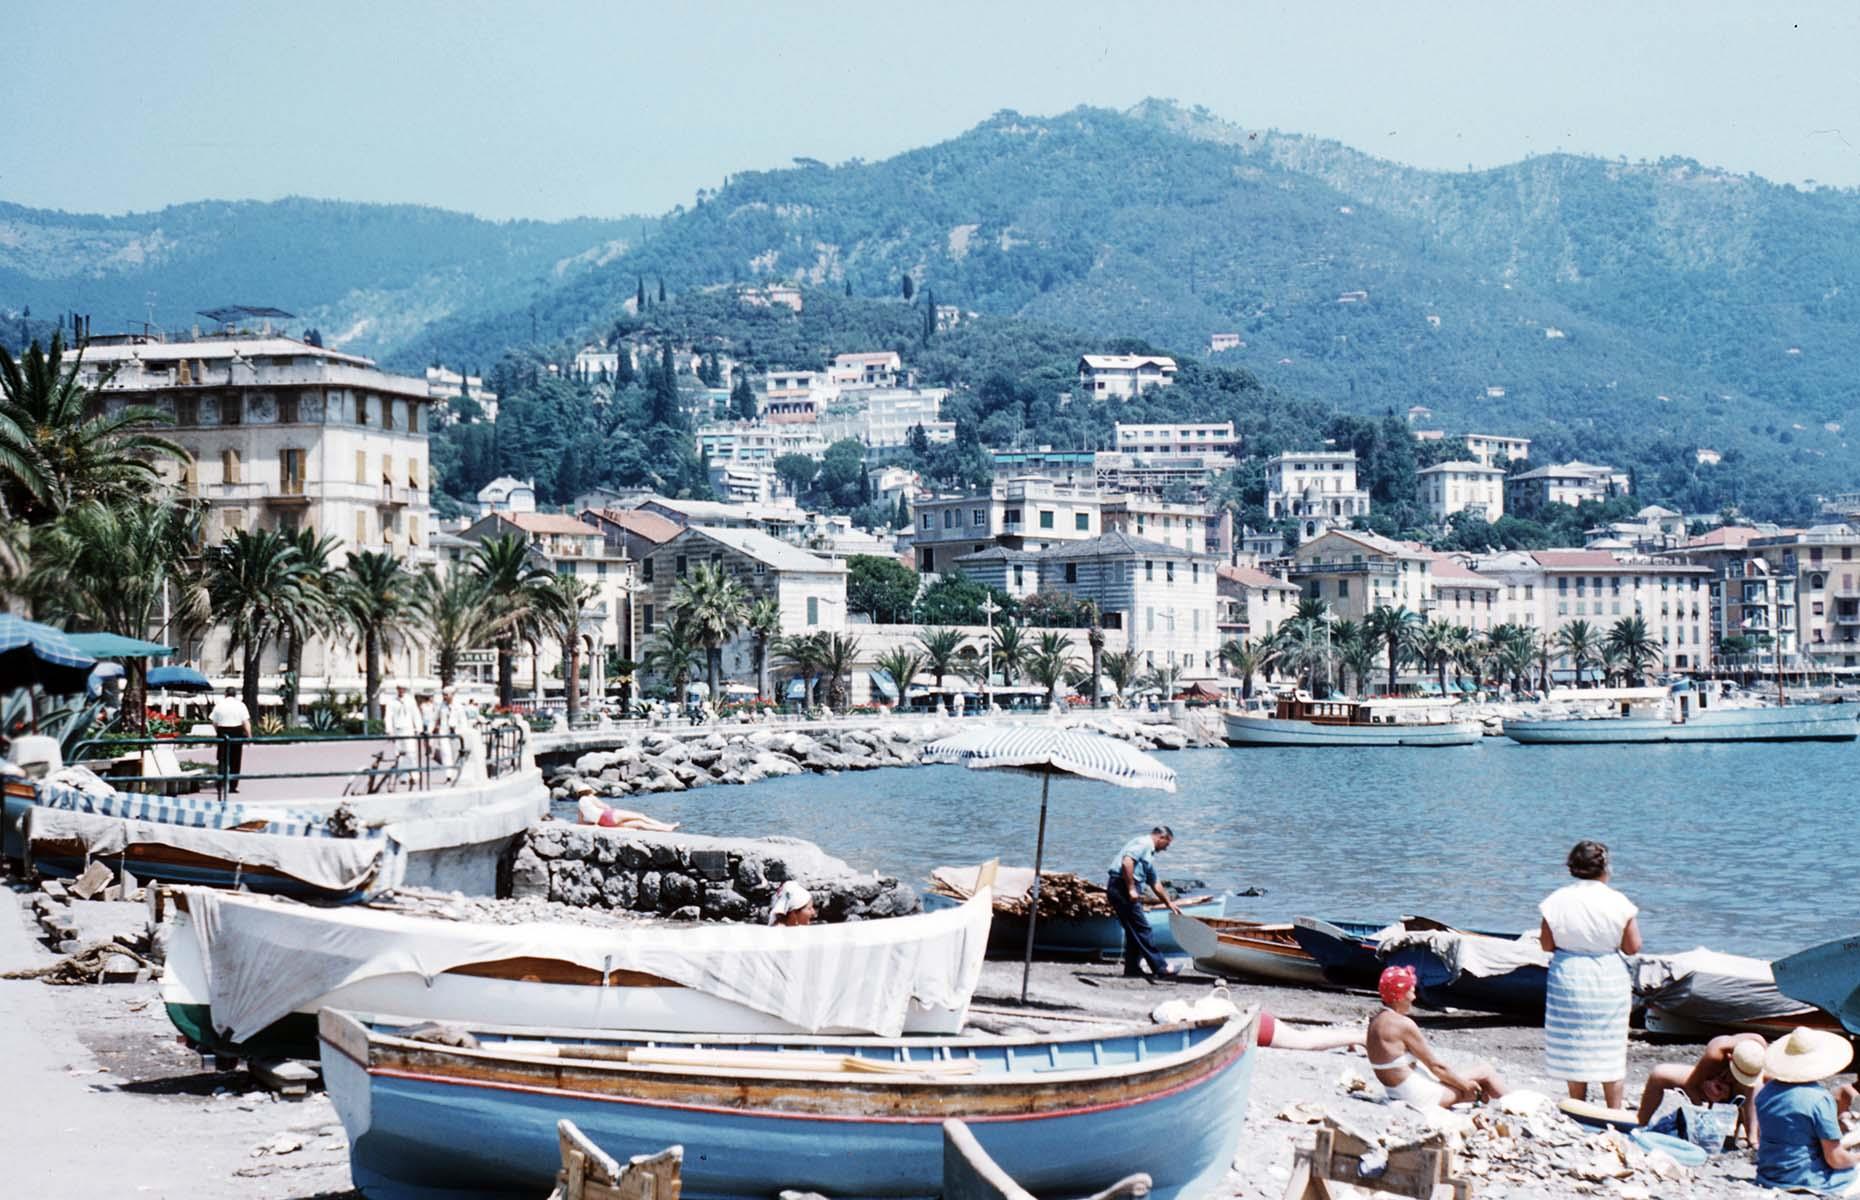 Although travel to Italy declined at the start of the 1900s, there was rapid growth in tourism following the Second World War as the world's economies started to recover. Over the following decades, travel became more accessible to people and destinations like Italy became incredibly popular due to pleasant weather, delicious food and stunning natural beauty. Amalfi Coast (pictured here in 1955) soon became a top vacation spot among celebrities, politicians, sports stars and even royals.